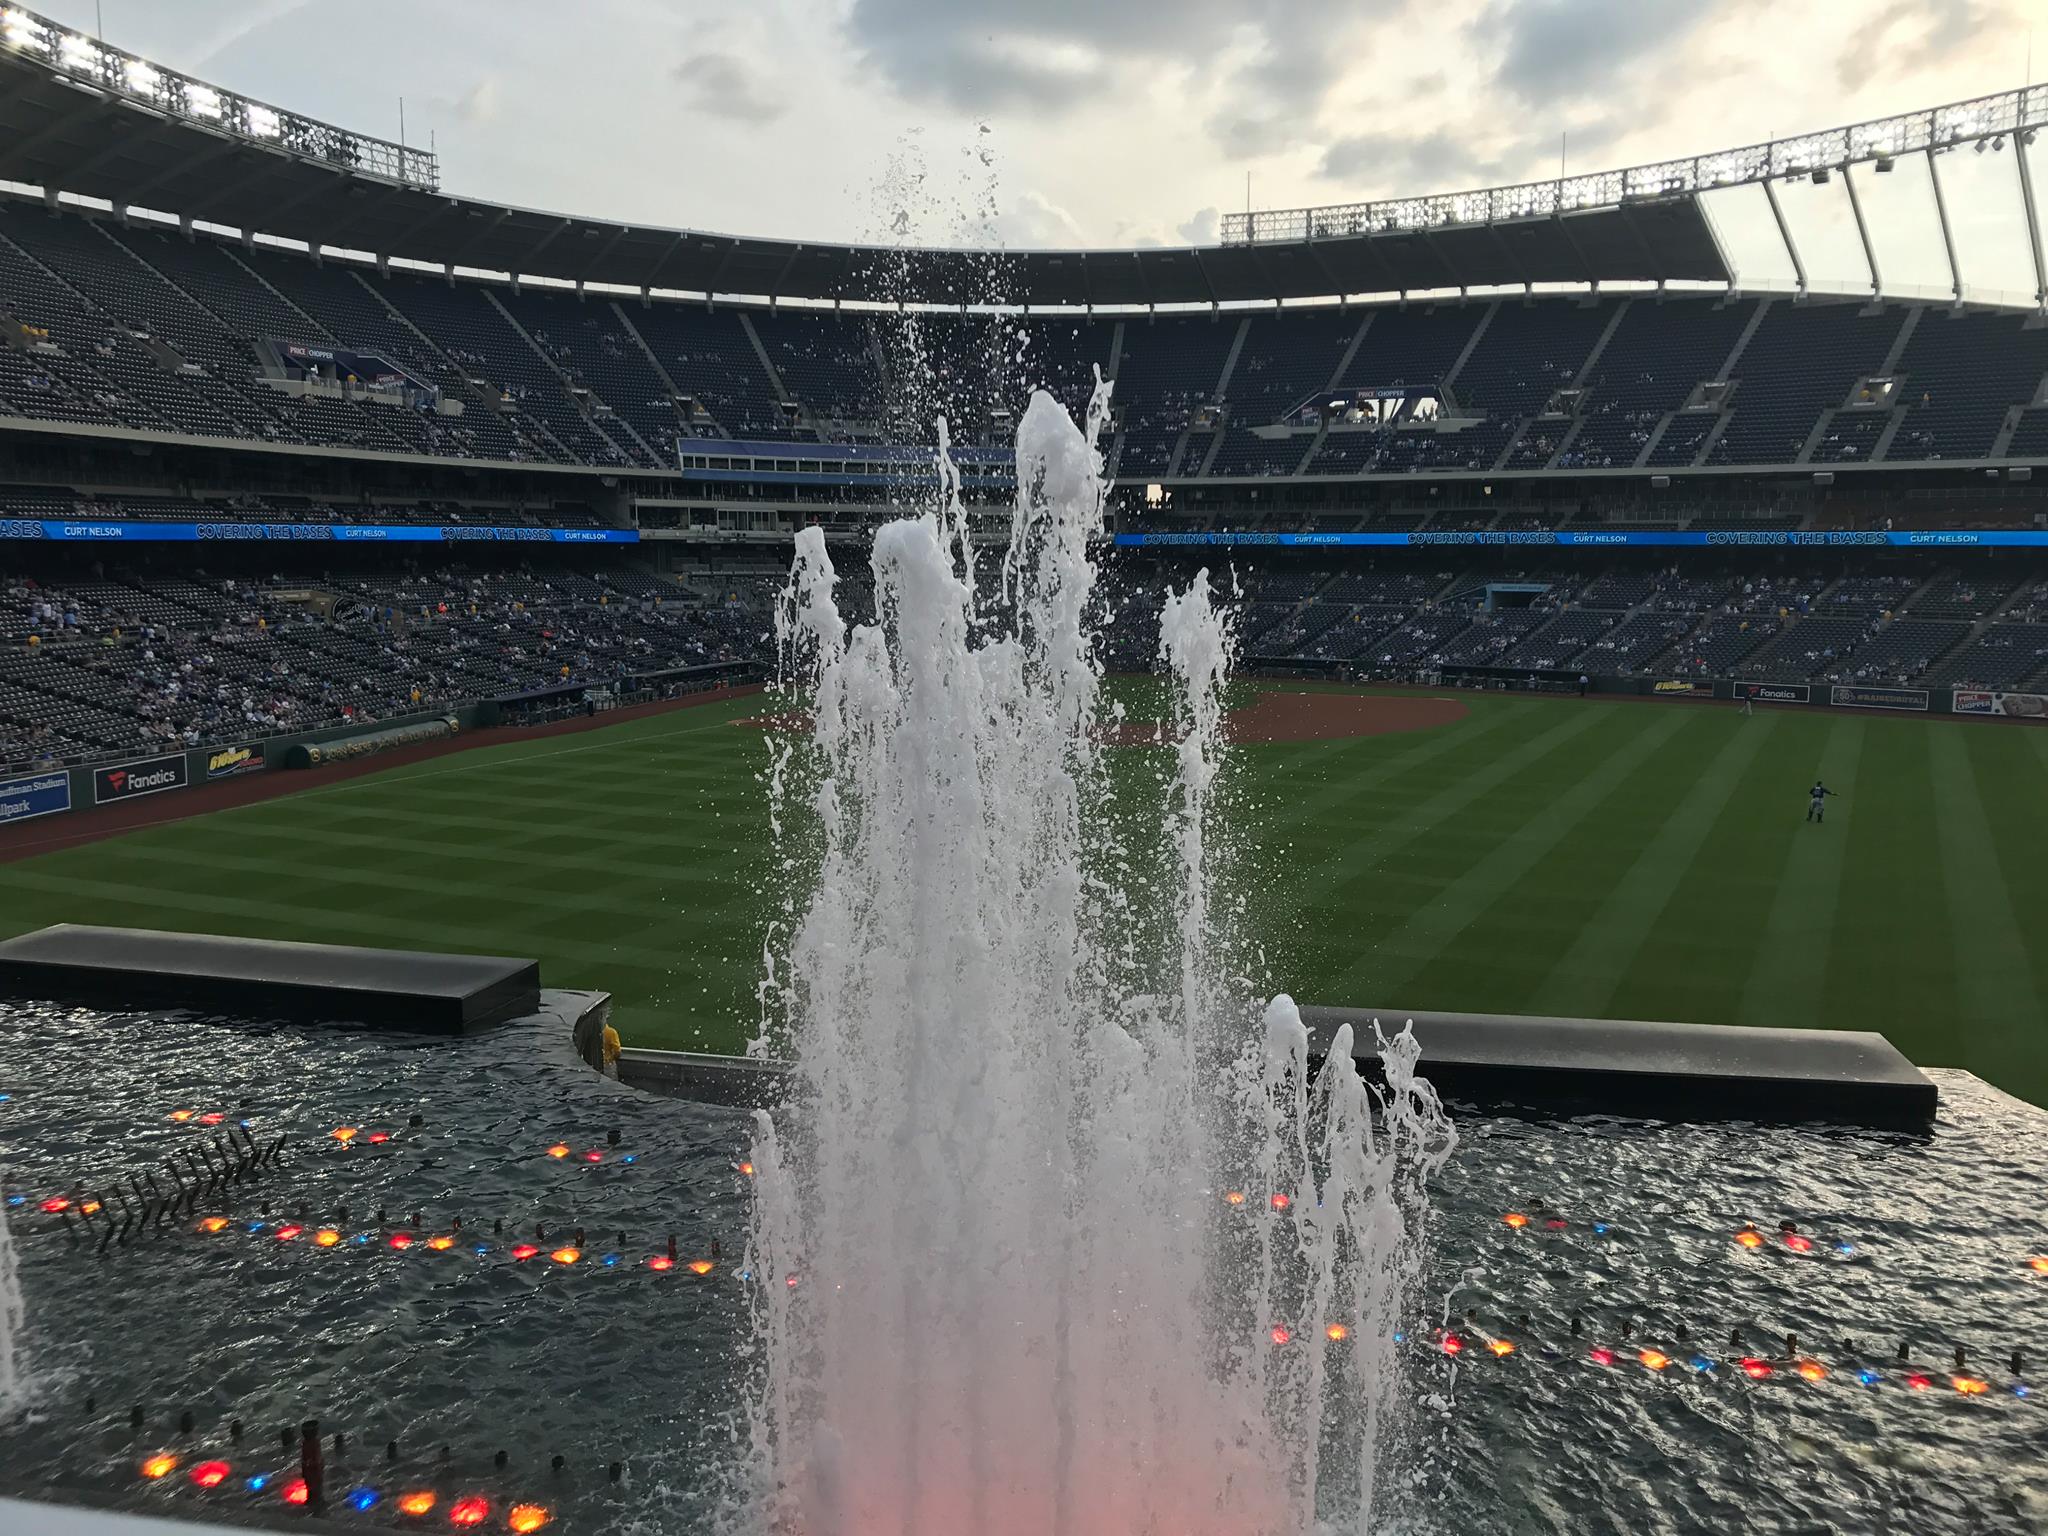 The value of a stadium entertainment district - Royals Review